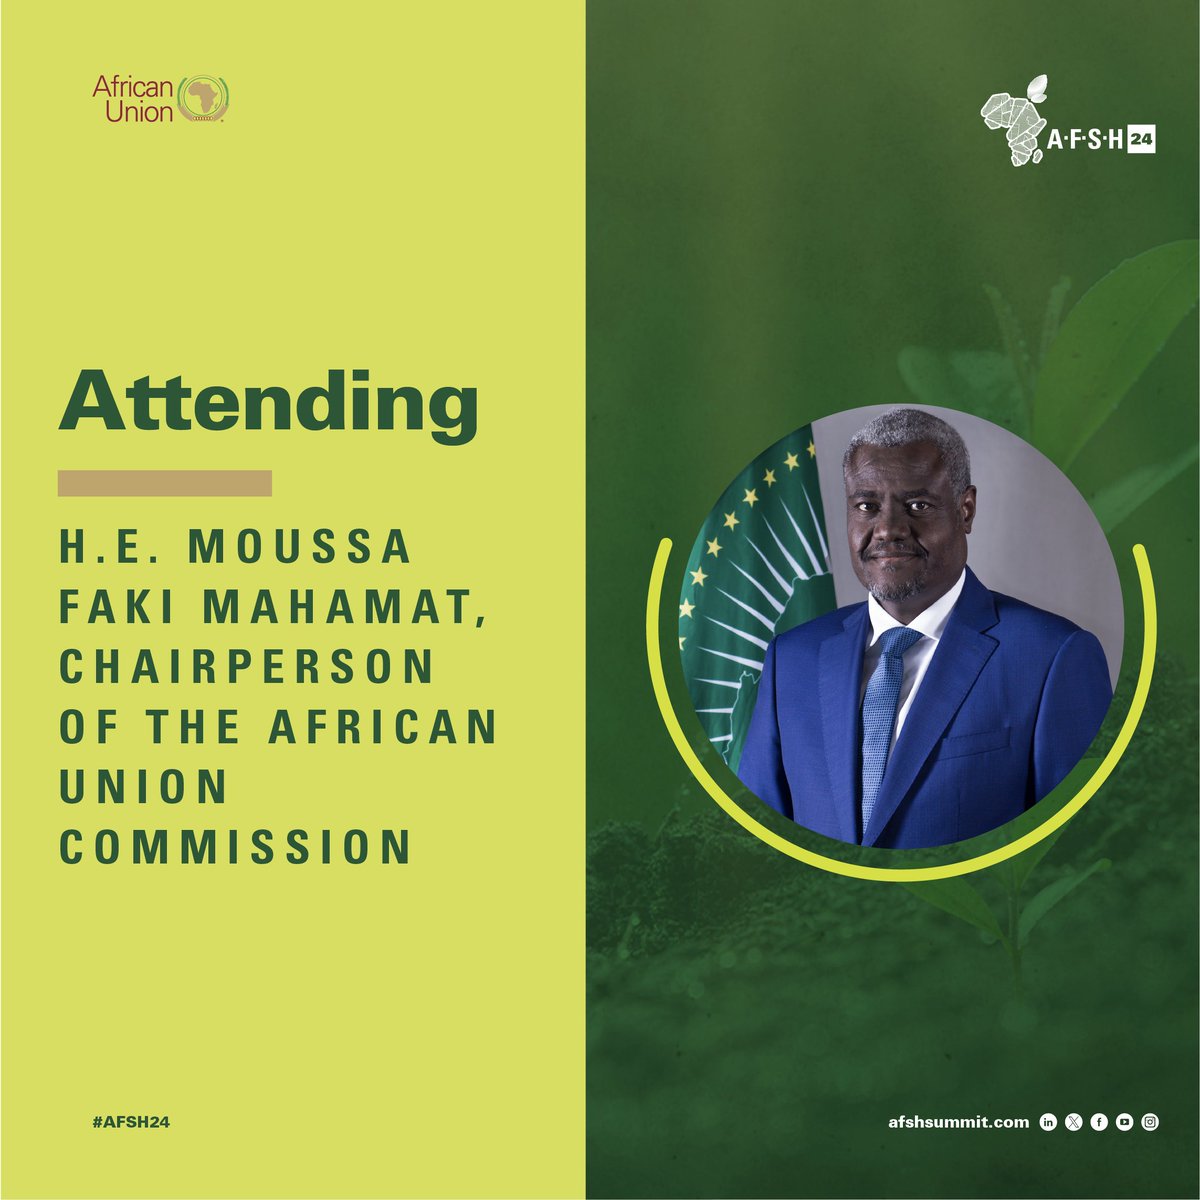 H.E @AUC_MoussaFaki,will lead @_AfricanUnion Commission,with  formidable leadership& knowledge.  His presence is an honour & privilege for the #AFSH24. He joins other key figures on commitments to #SoilHealth across Africa - join us as we work towards
#Agenda2063
#AfricaWeWant